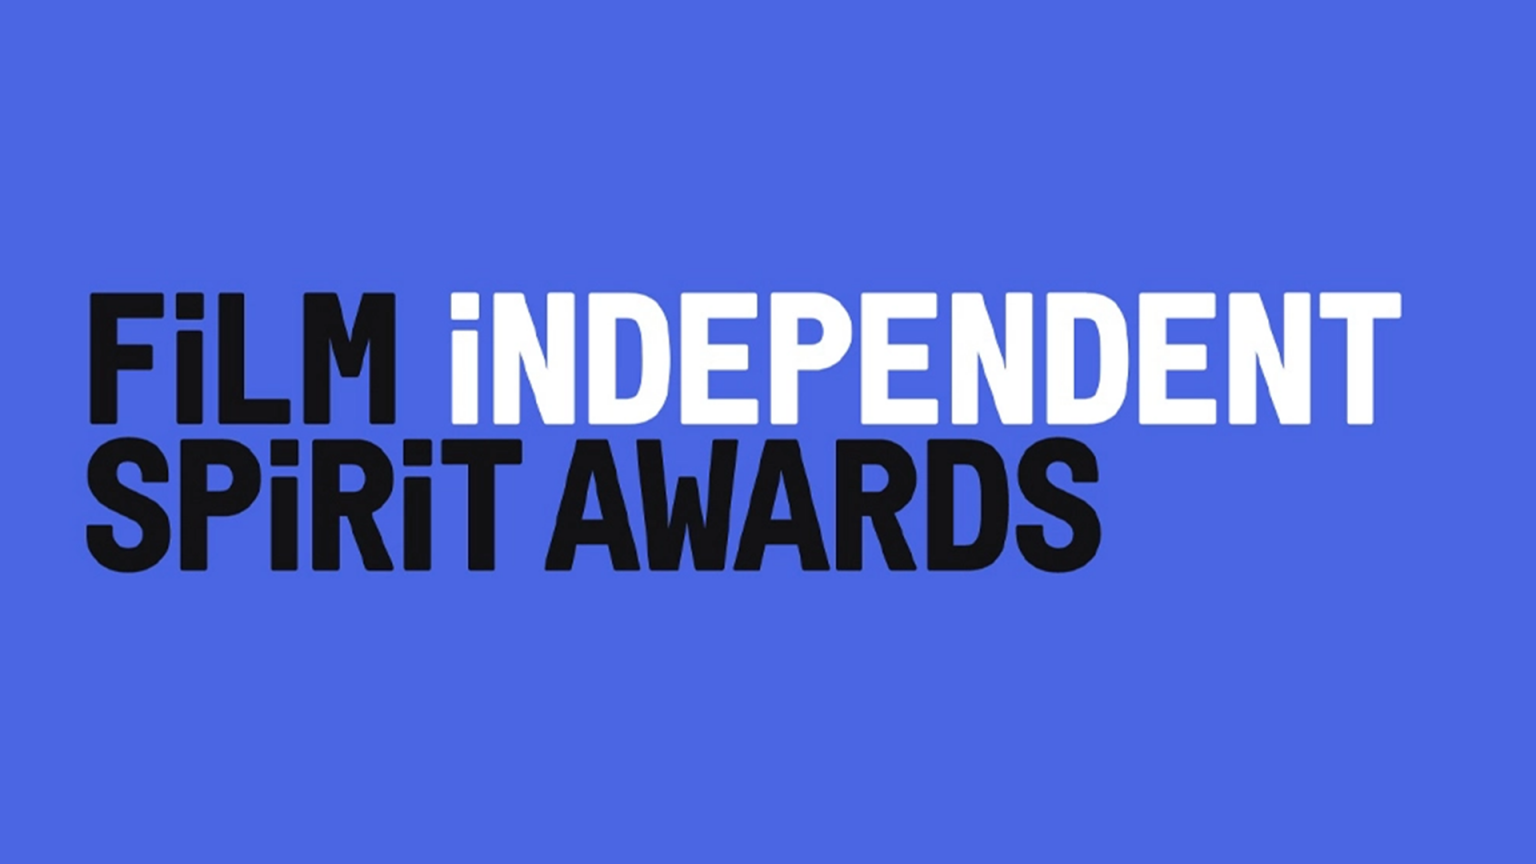 AFI Alumni Score Nominations and Wins at the 38th Film Independent